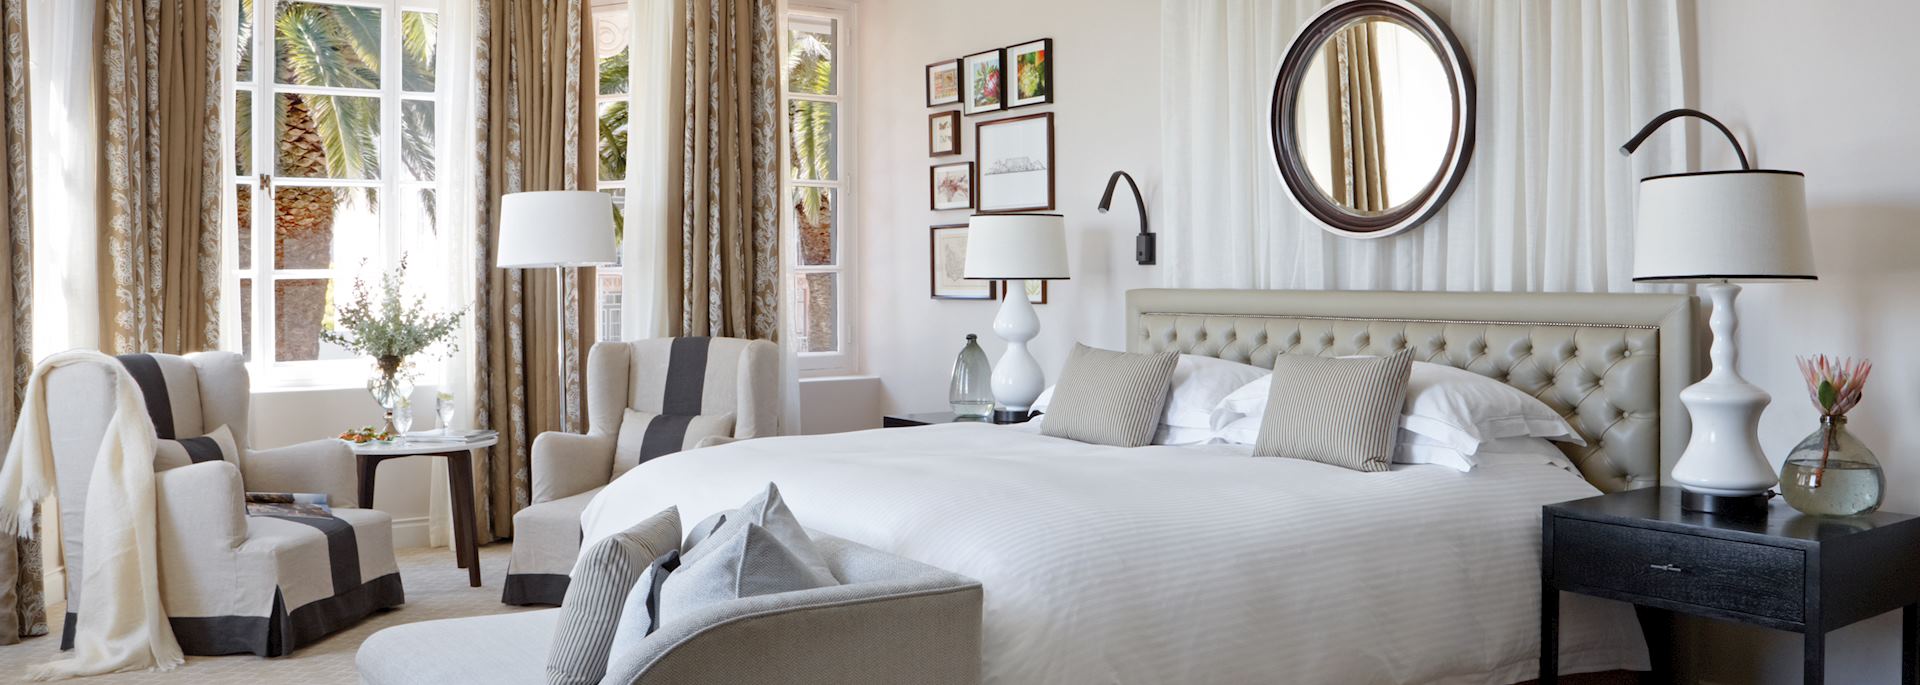 Guest room at Belmond Mount Nelson, Cape Town